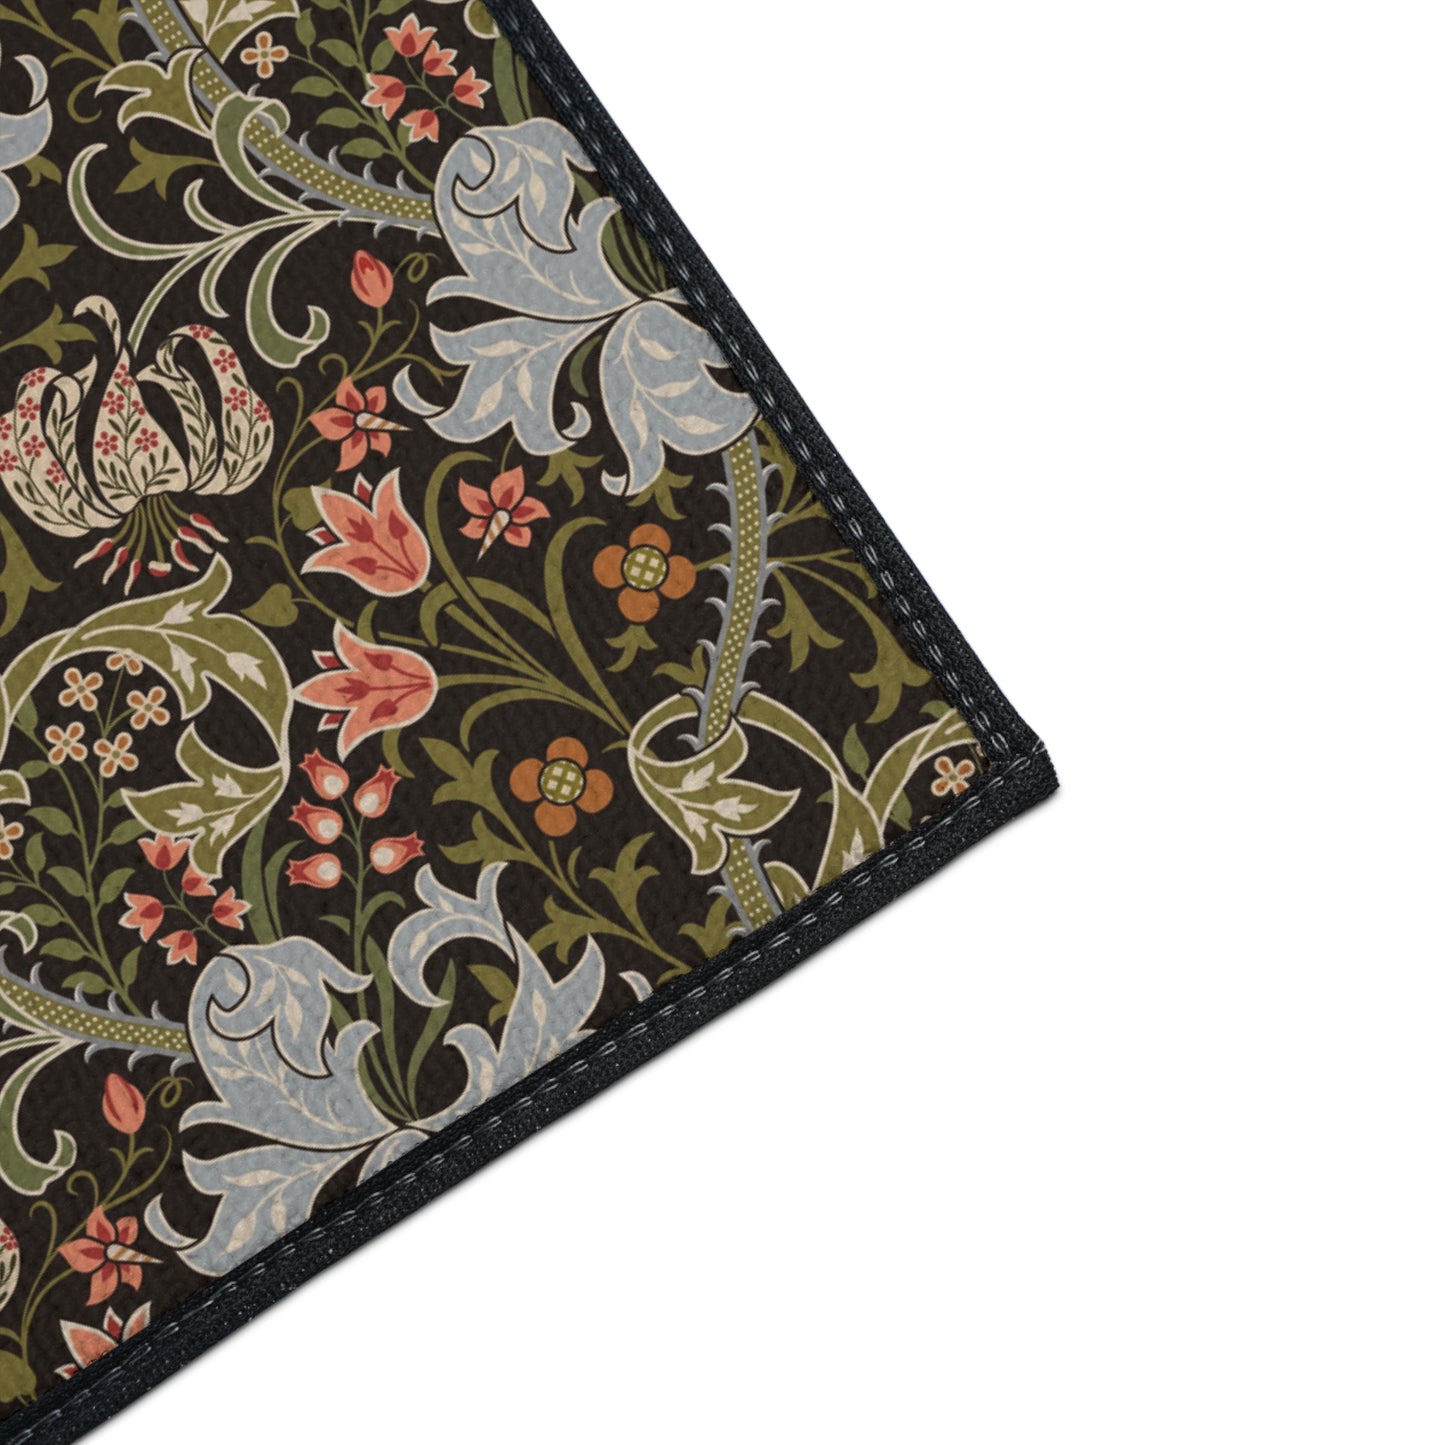 william-morris-co-heavy-duty-floor-mat-golden-lily-collection-midnight-18